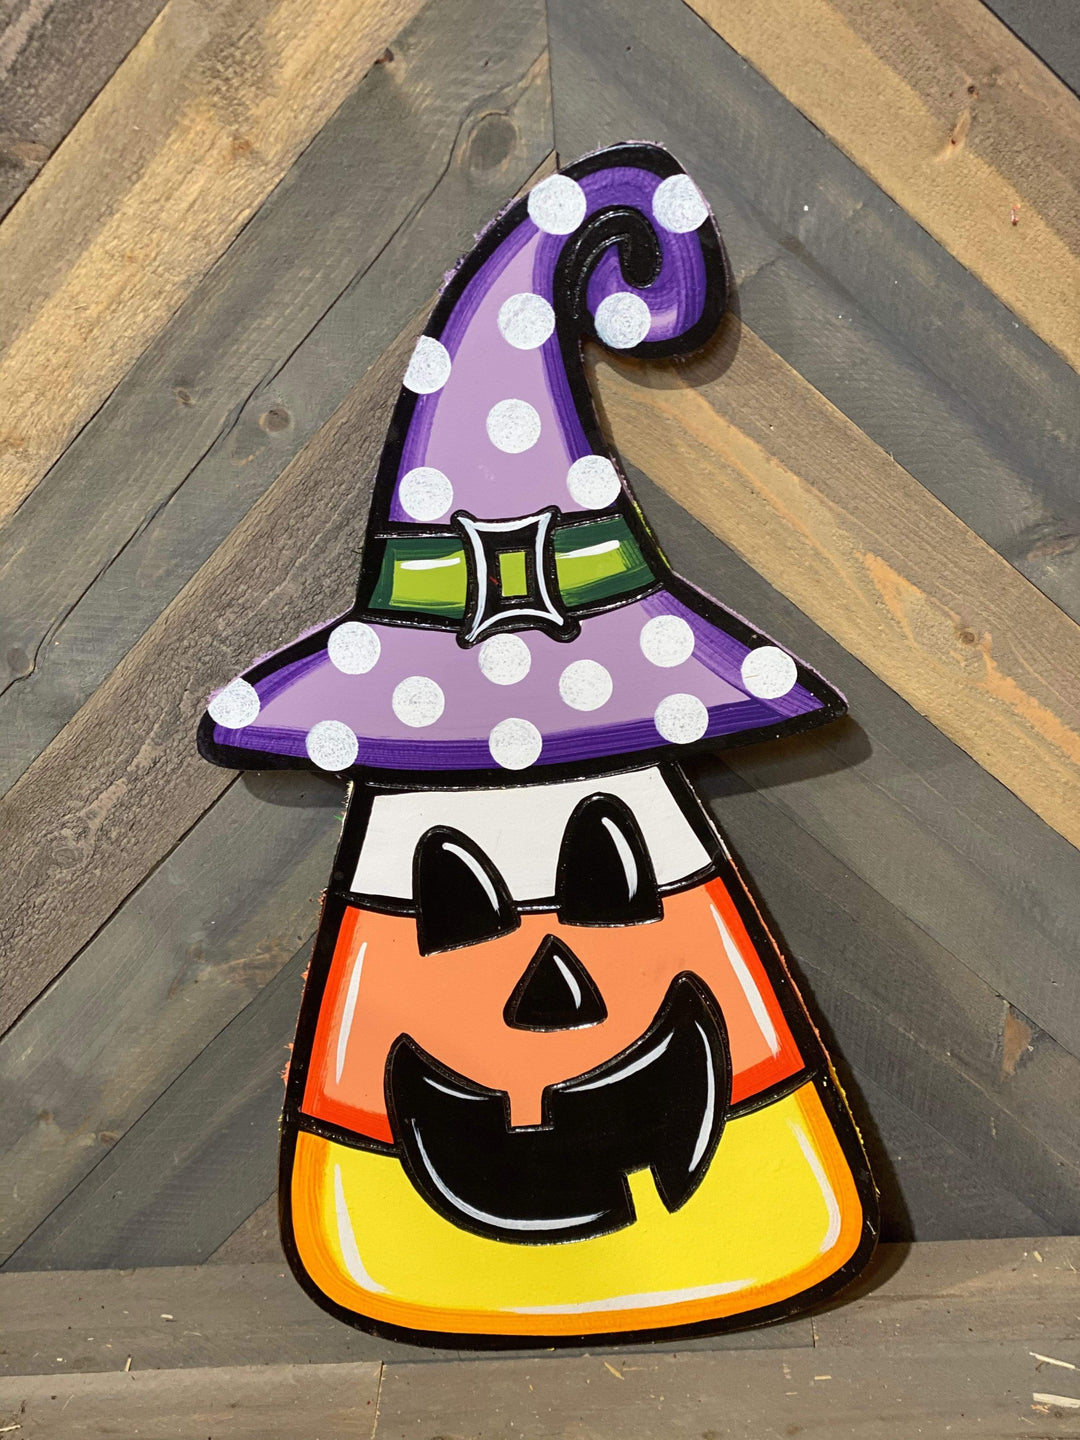 candy corn with witch's hat and face painted yard art design